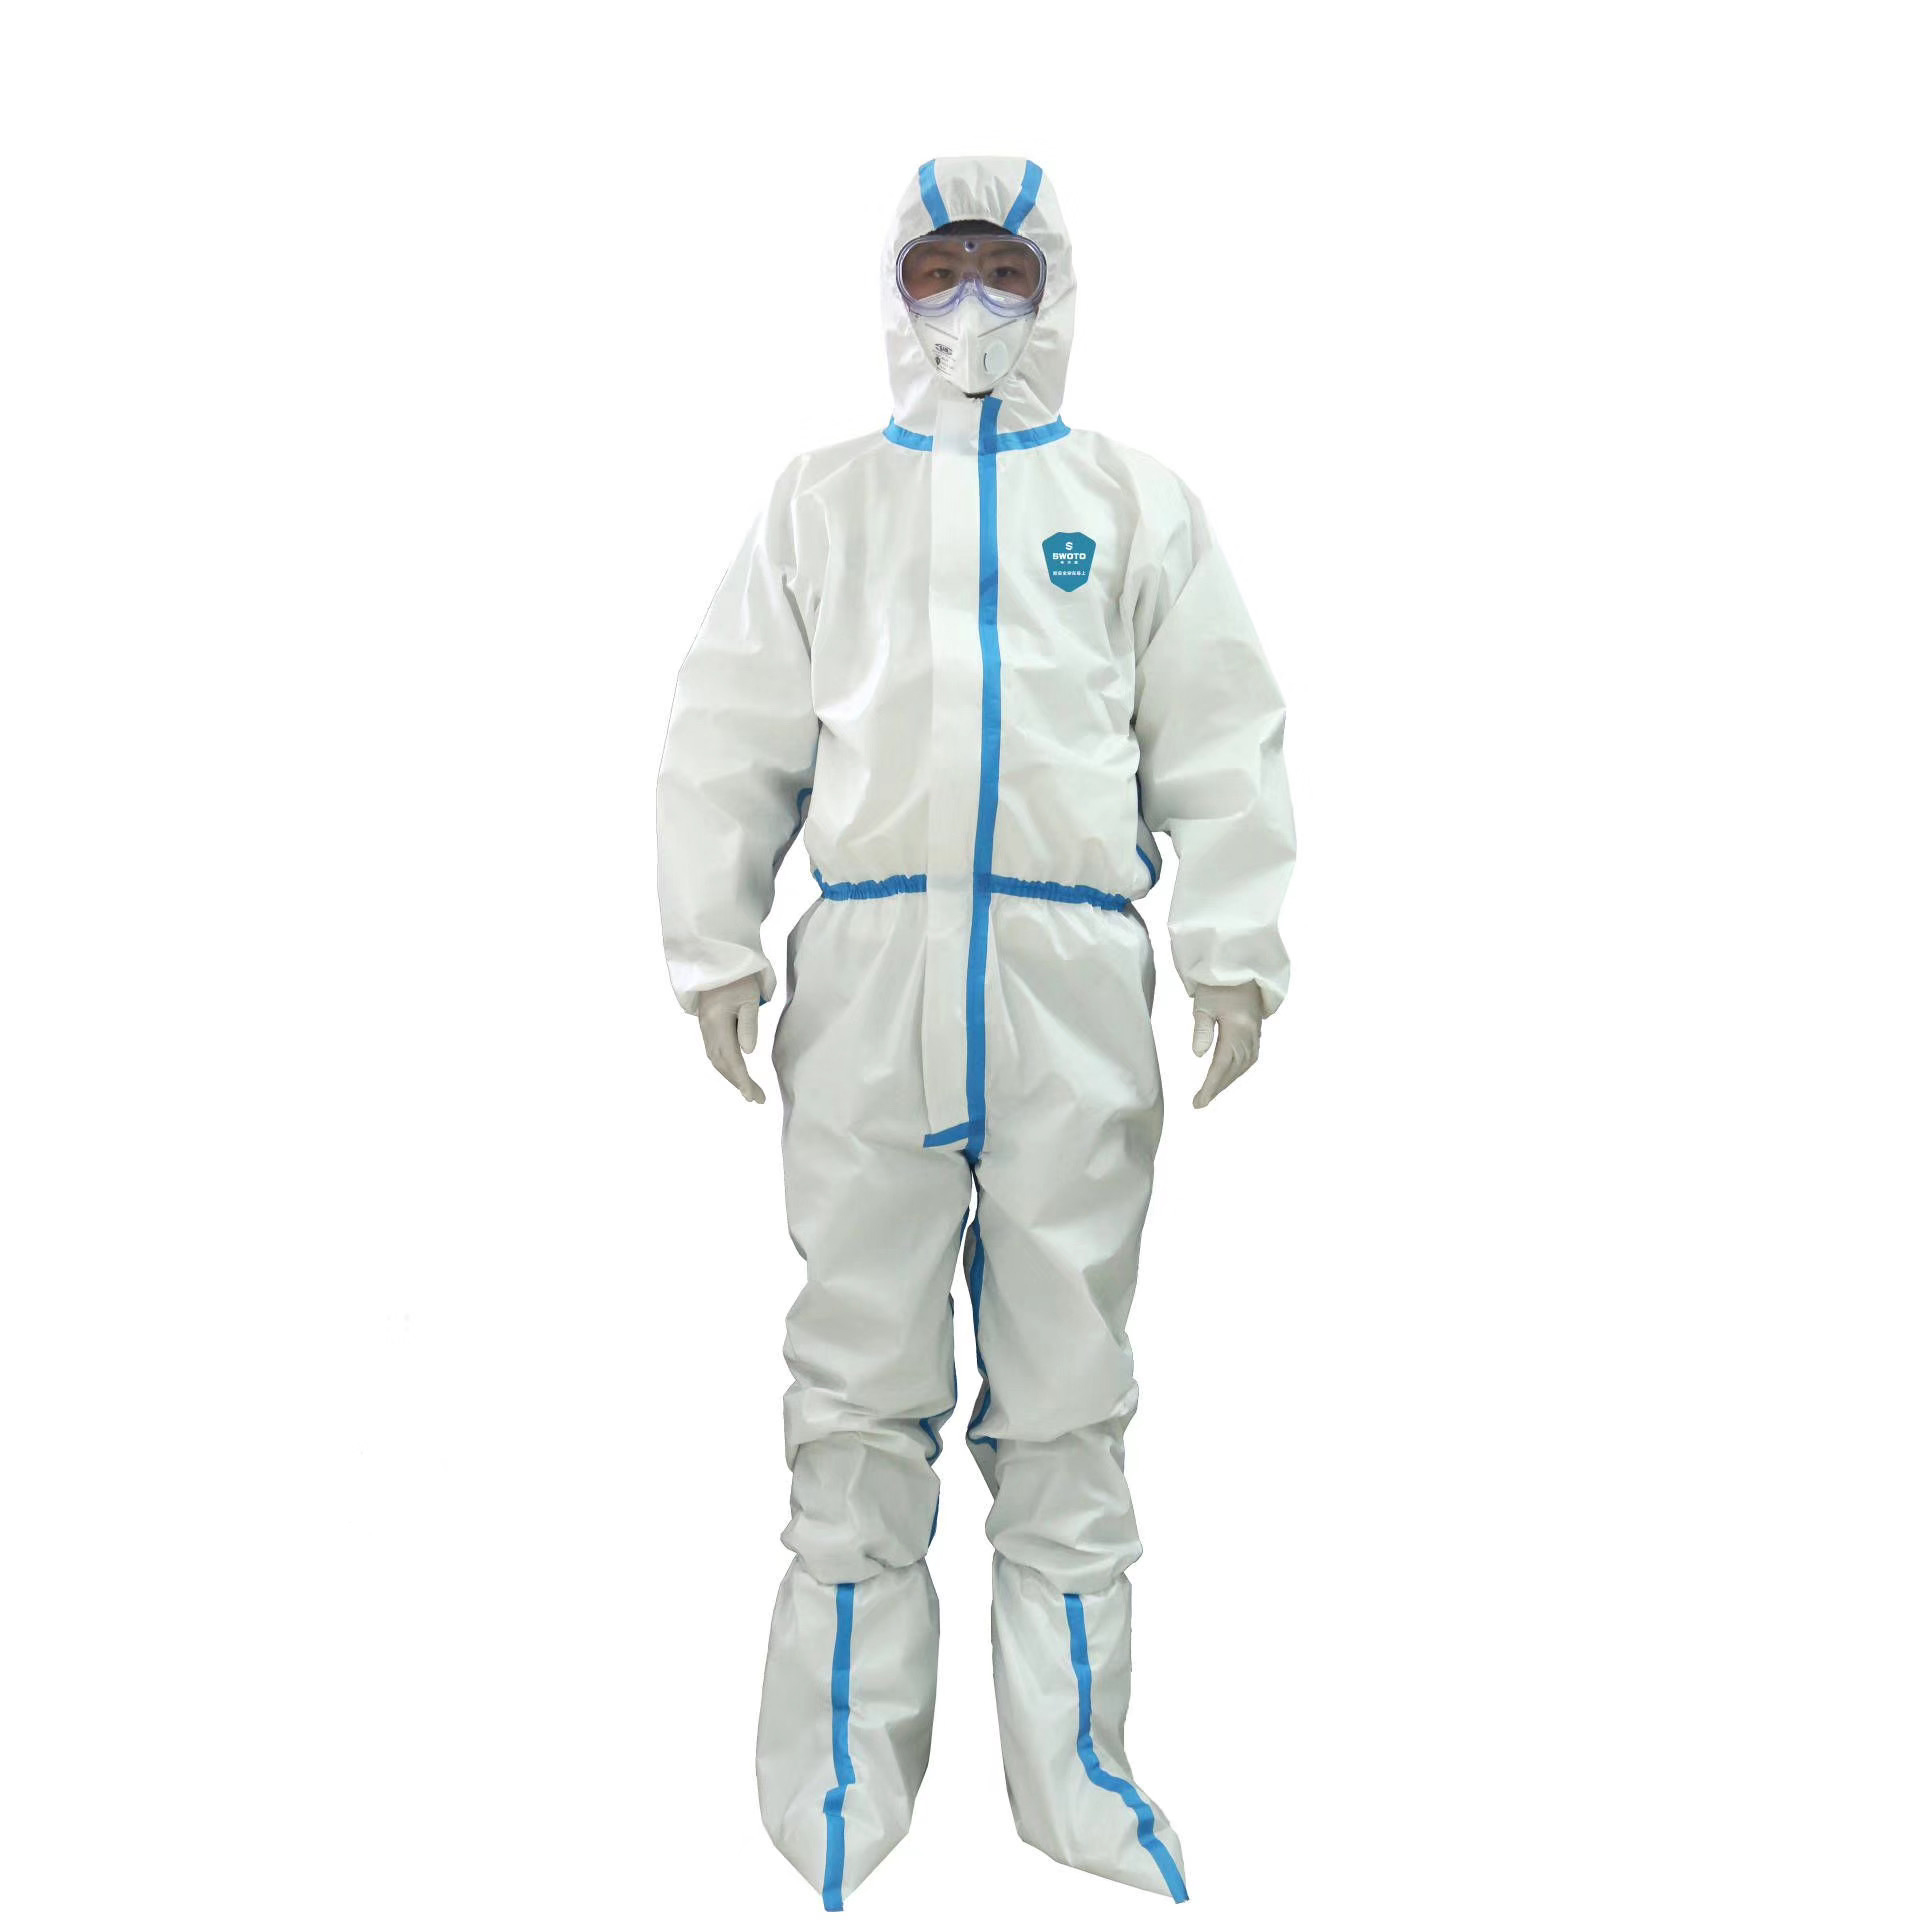 CE Certificated Medical Surgical Waterproof Disposable Protective Clothing Safety Coverall Suit Garment Non Woven Protective Body Suits